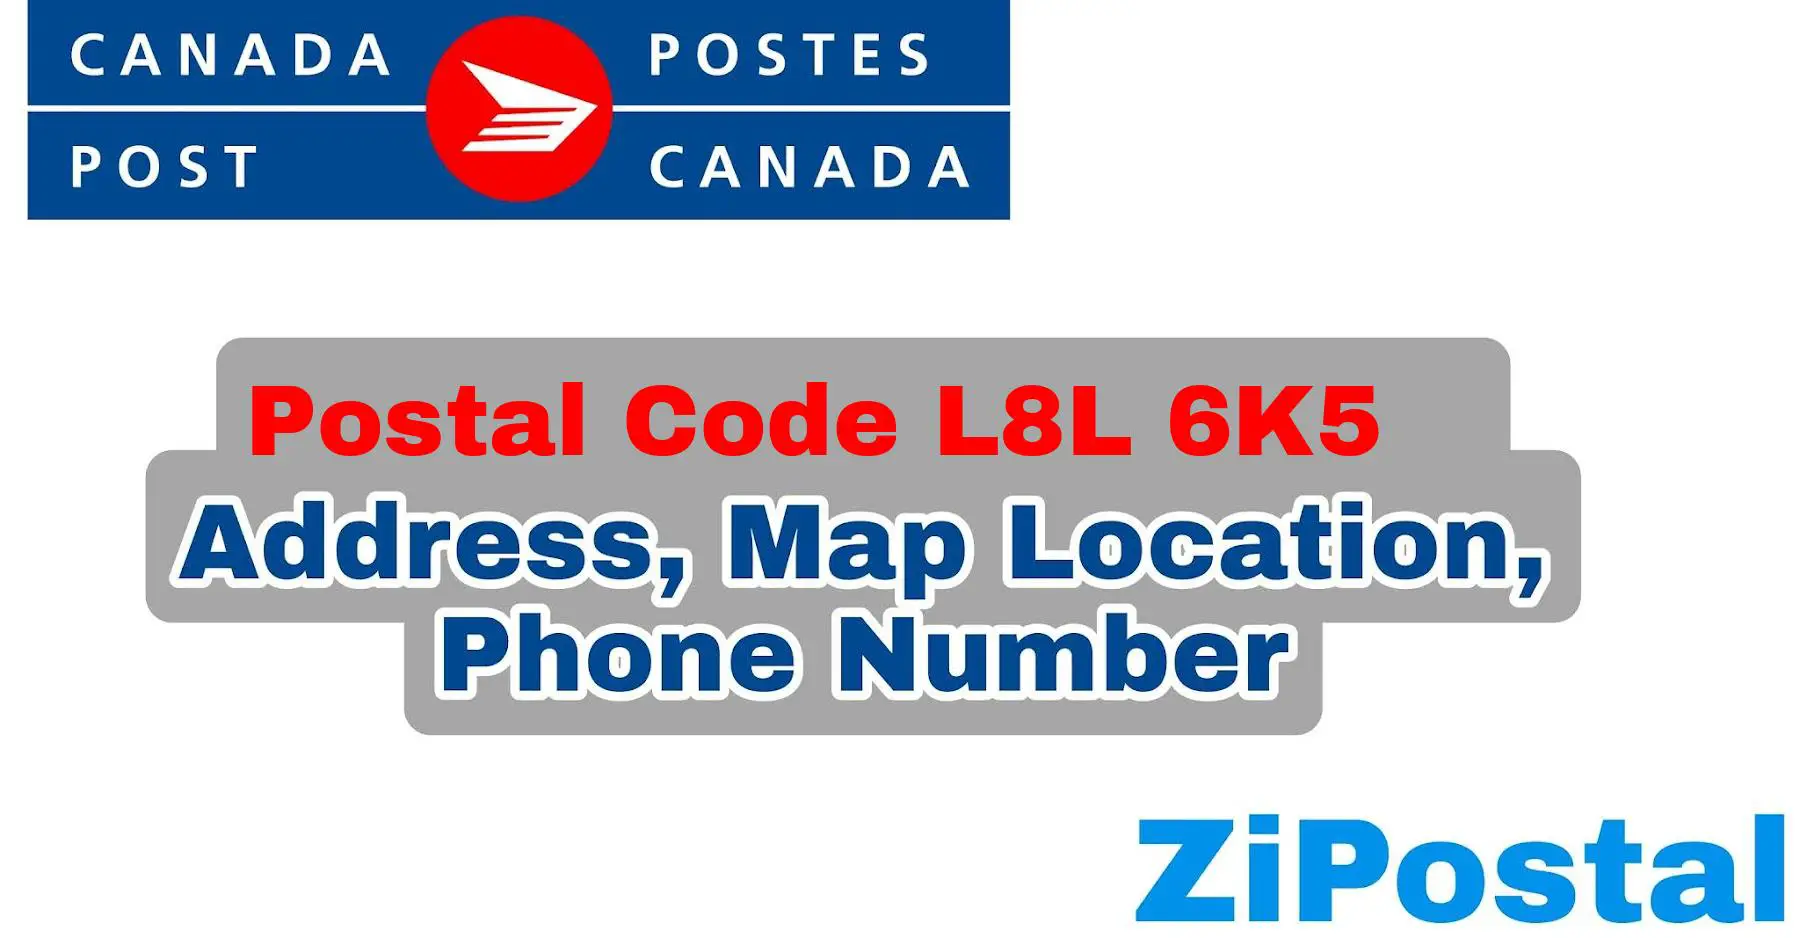 Postal Code L8L 6K5 Address Map Location and Phone Number